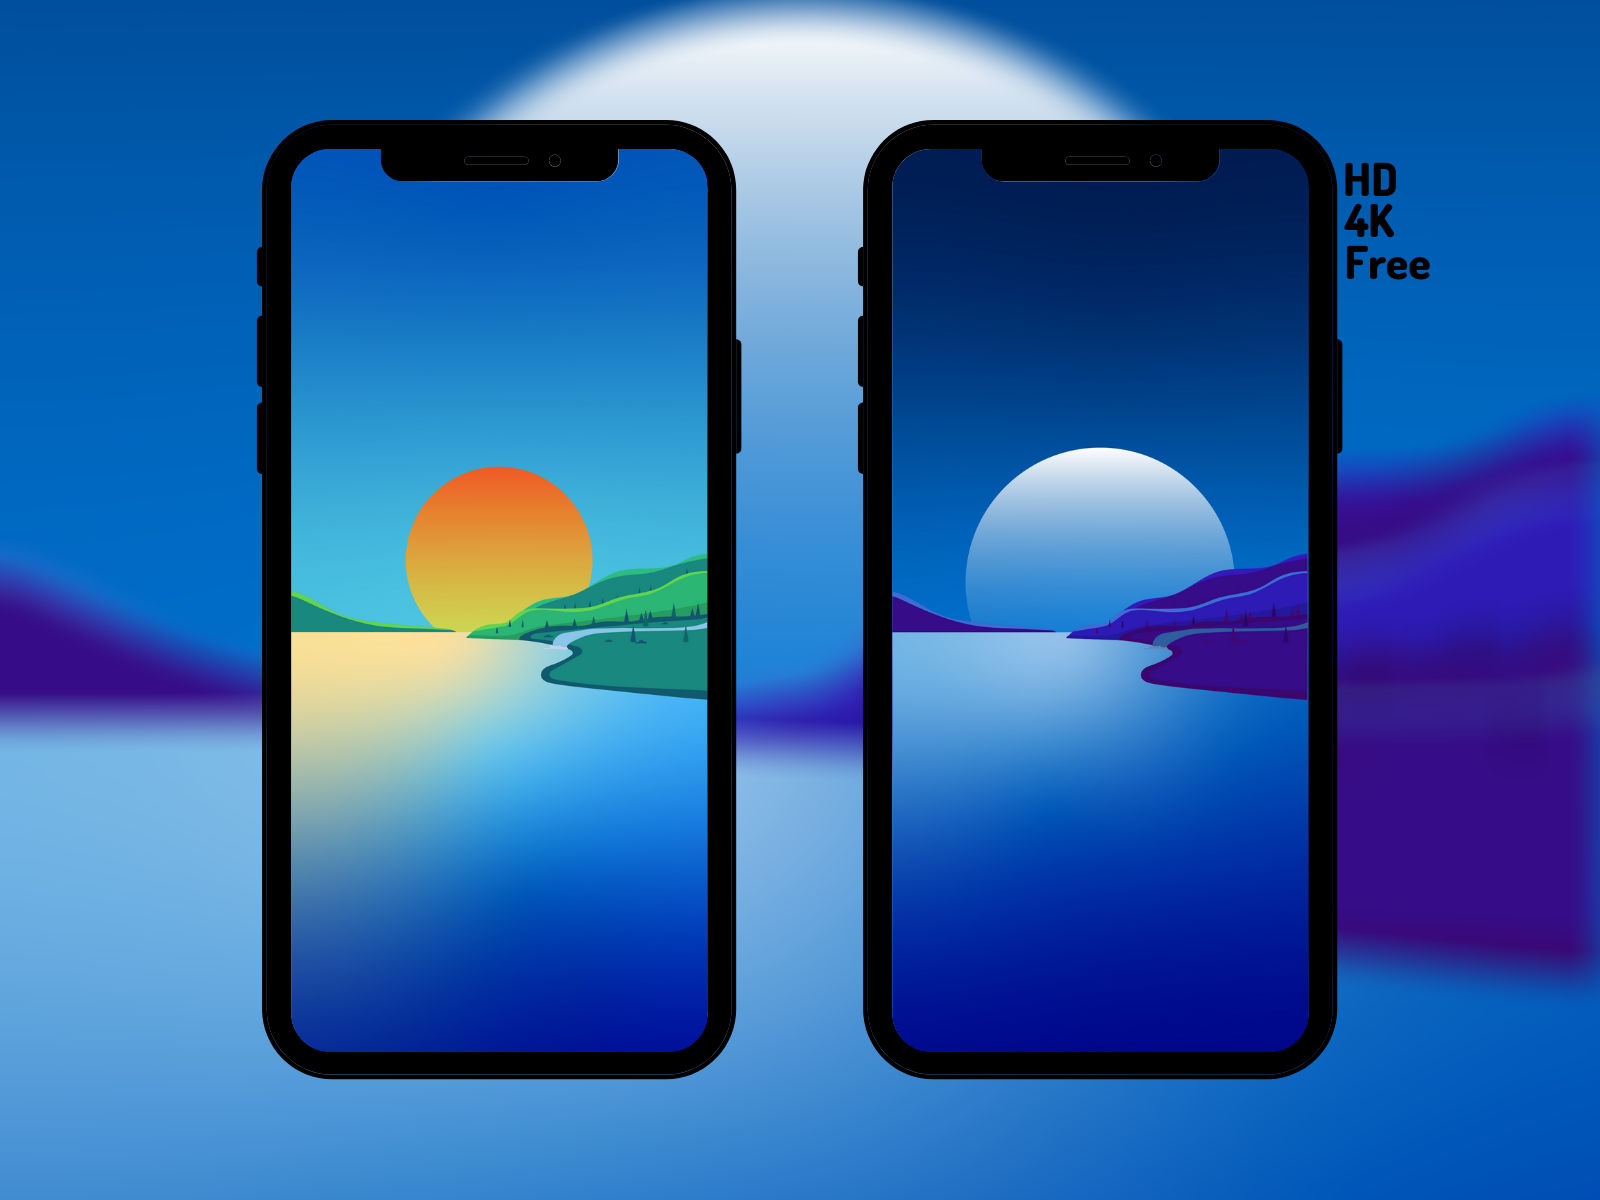 Phone wallpapers - Day and night minimalist view by Jorge Hardt on Dribbble